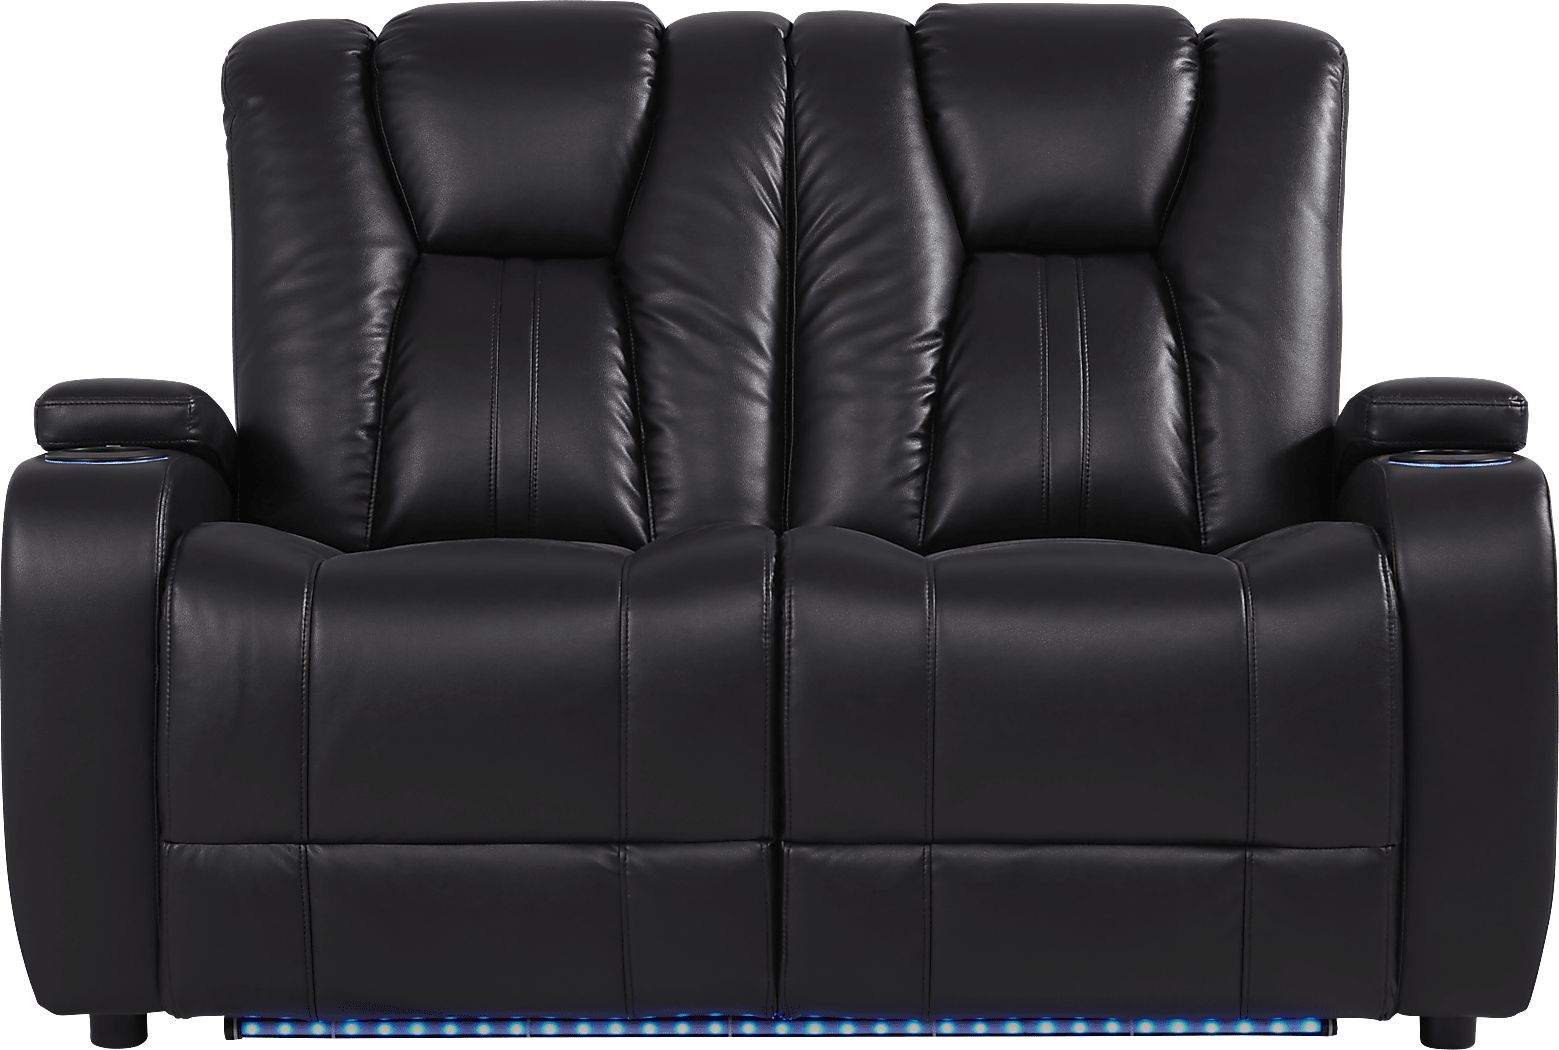 Kingvale Court Black 7 Pc Living Room with Dual Power Reclining Sofa